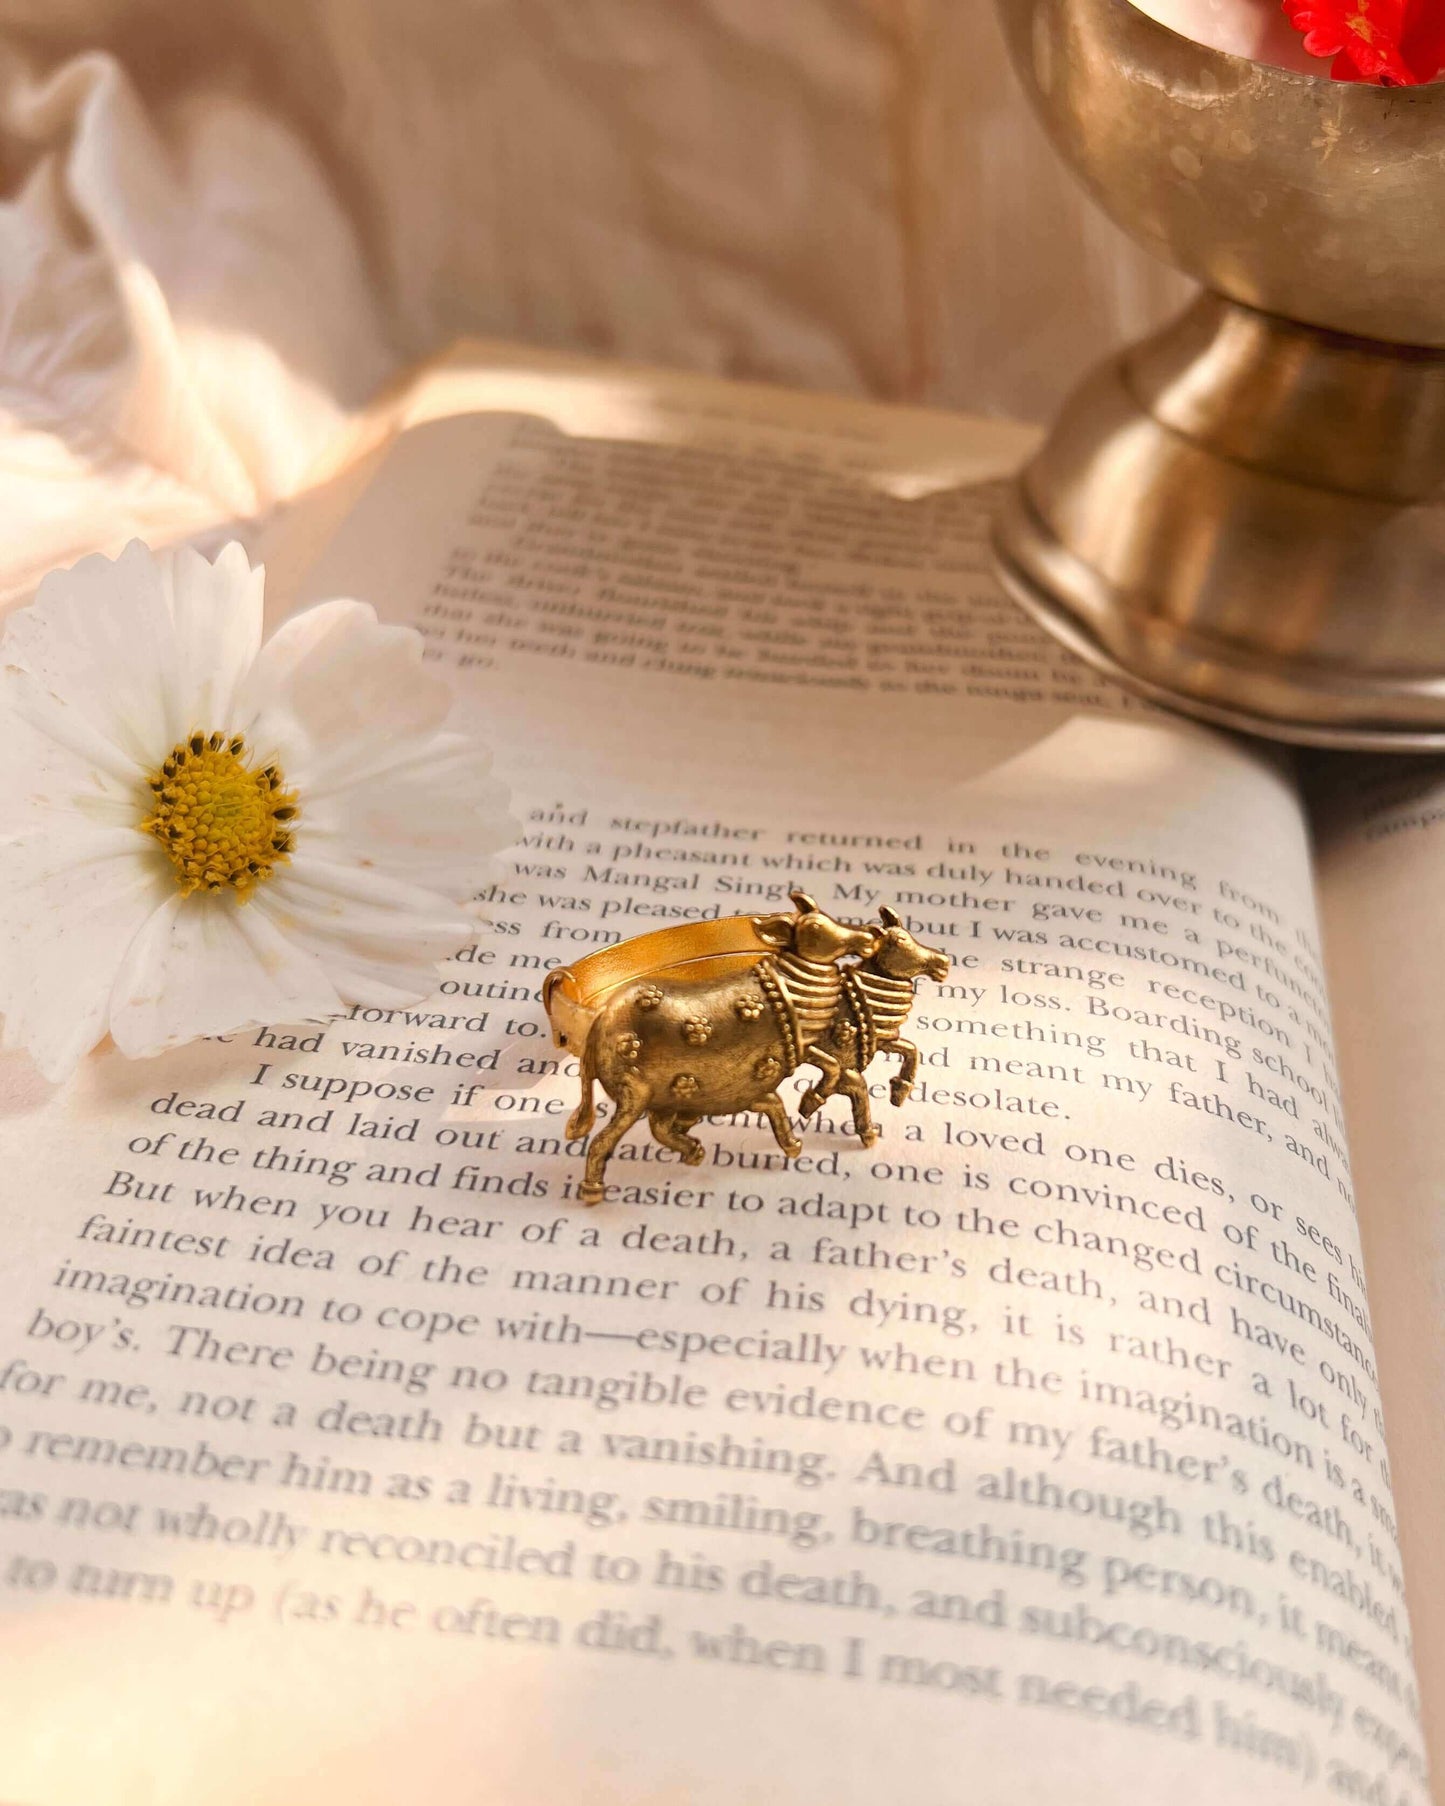 Nandi gold plated adjustable silver ring